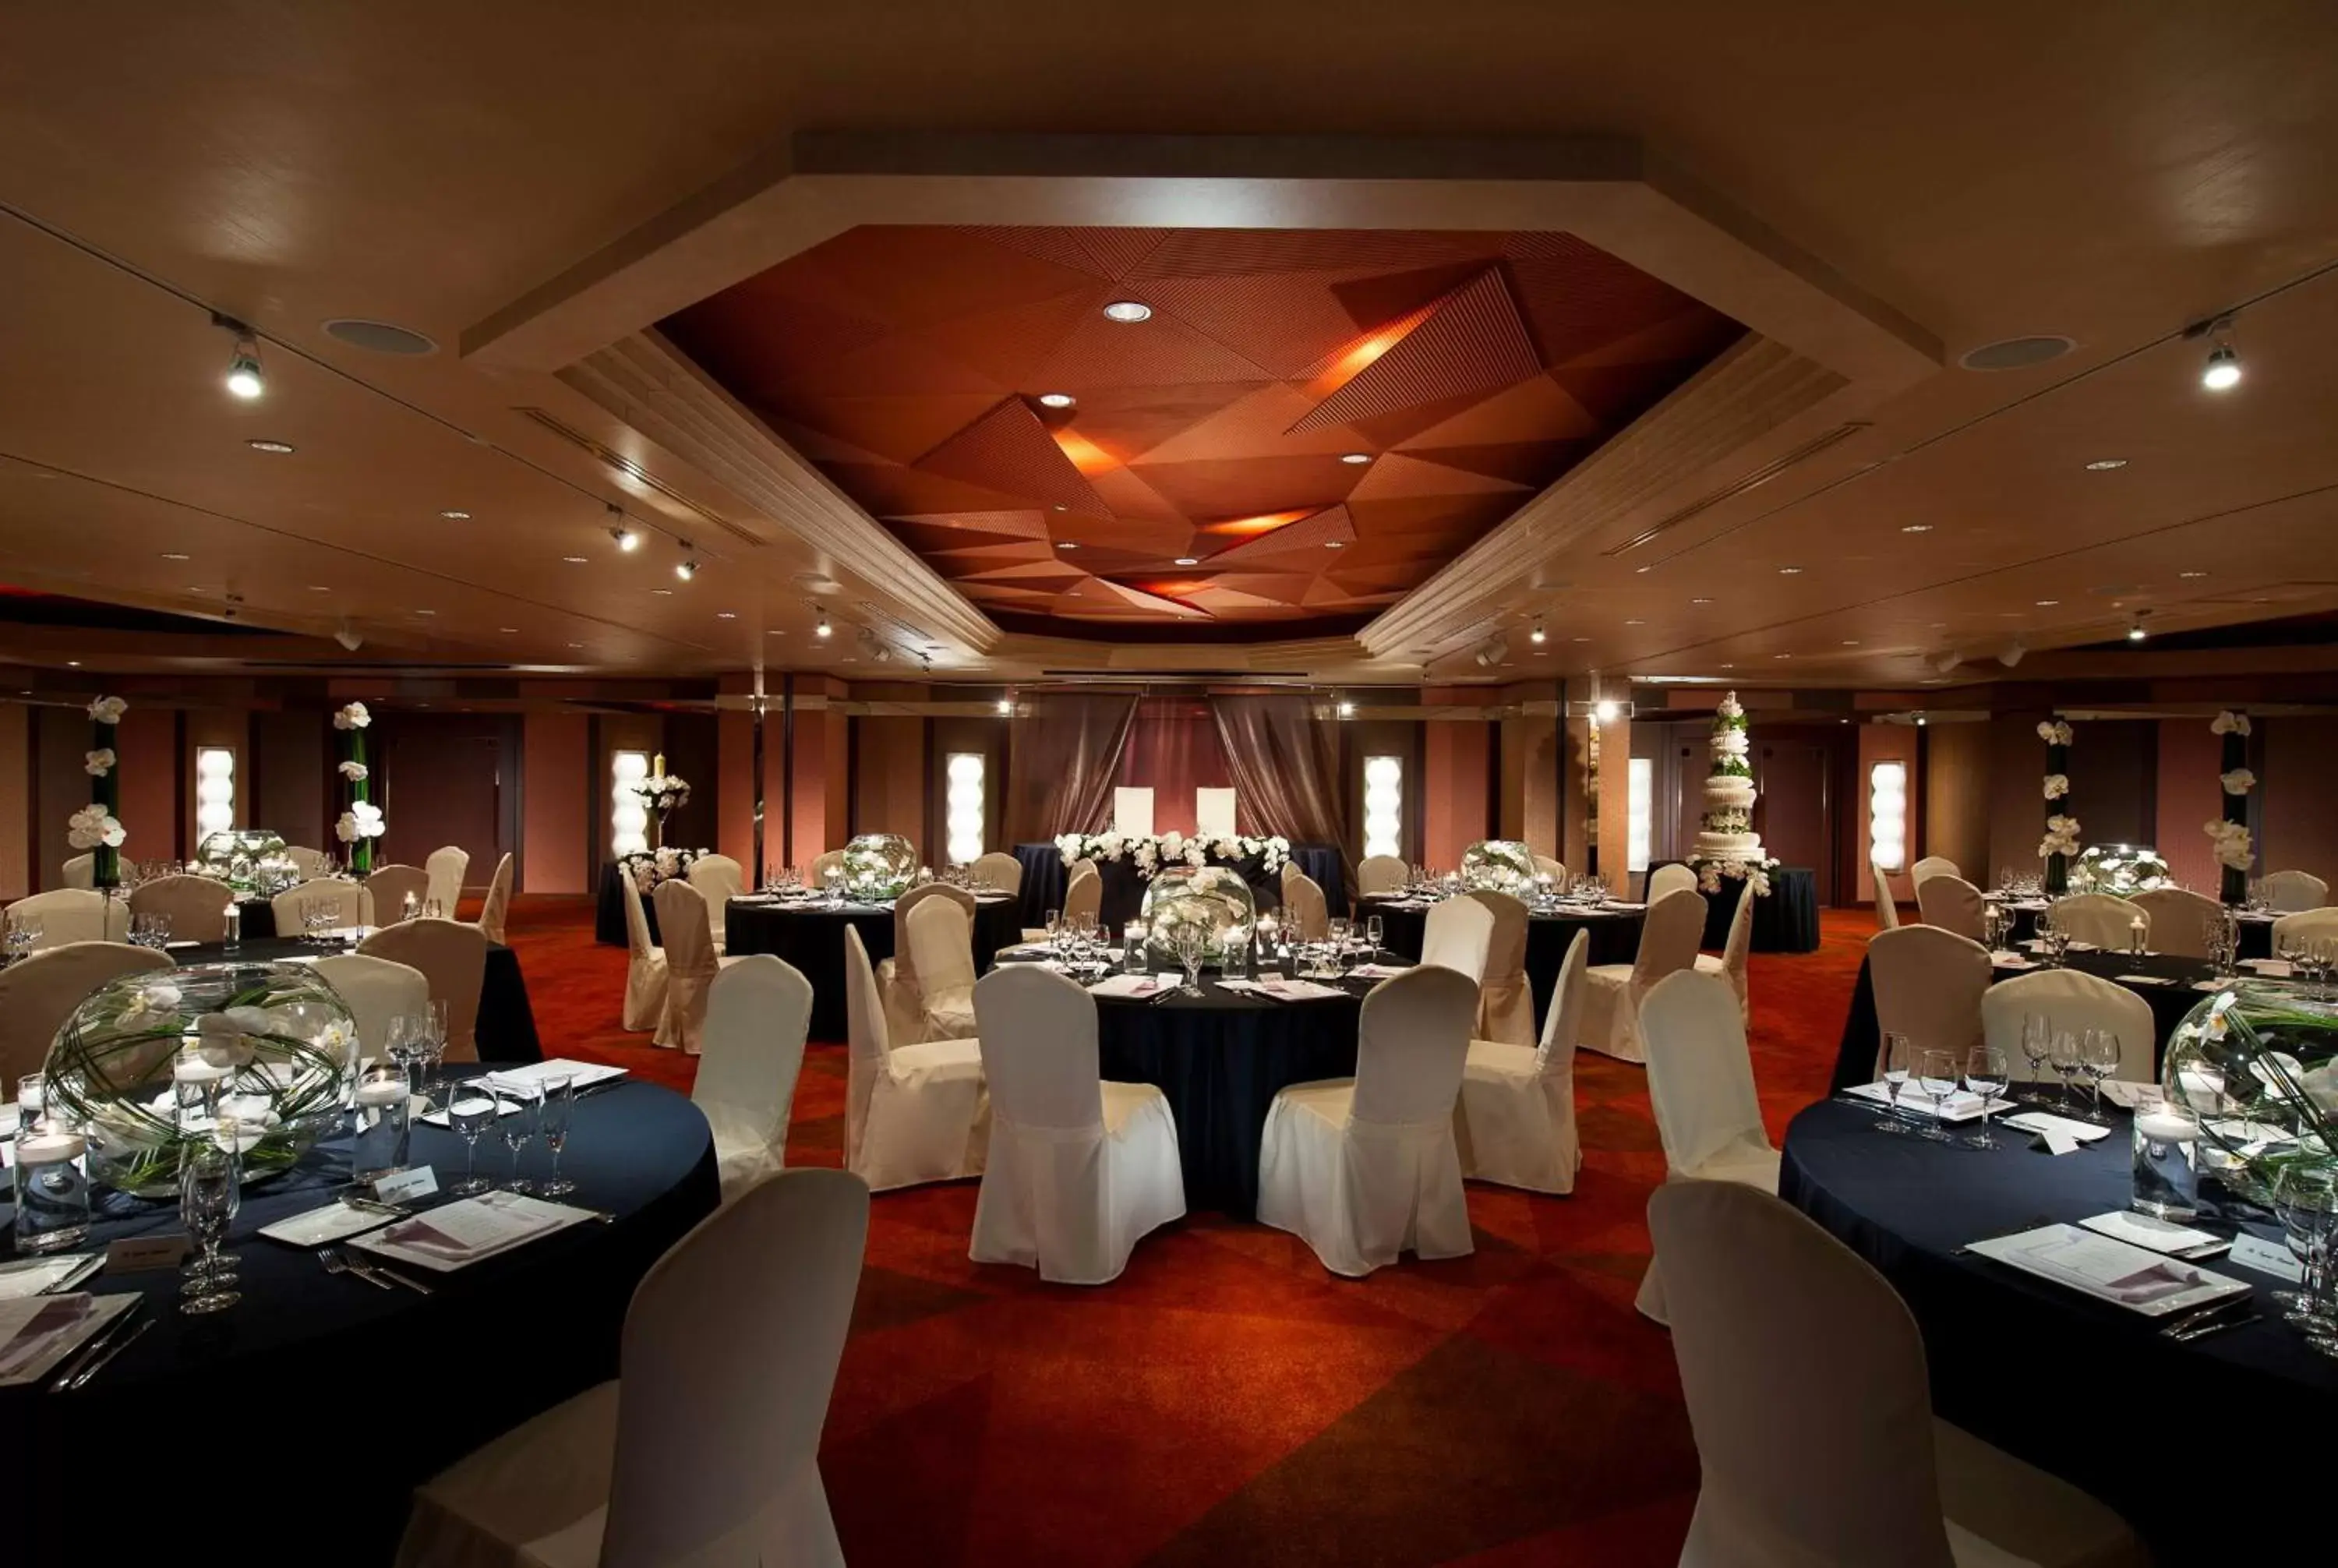 Meeting/conference room, Banquet Facilities in Hilton Tokyo Hotel